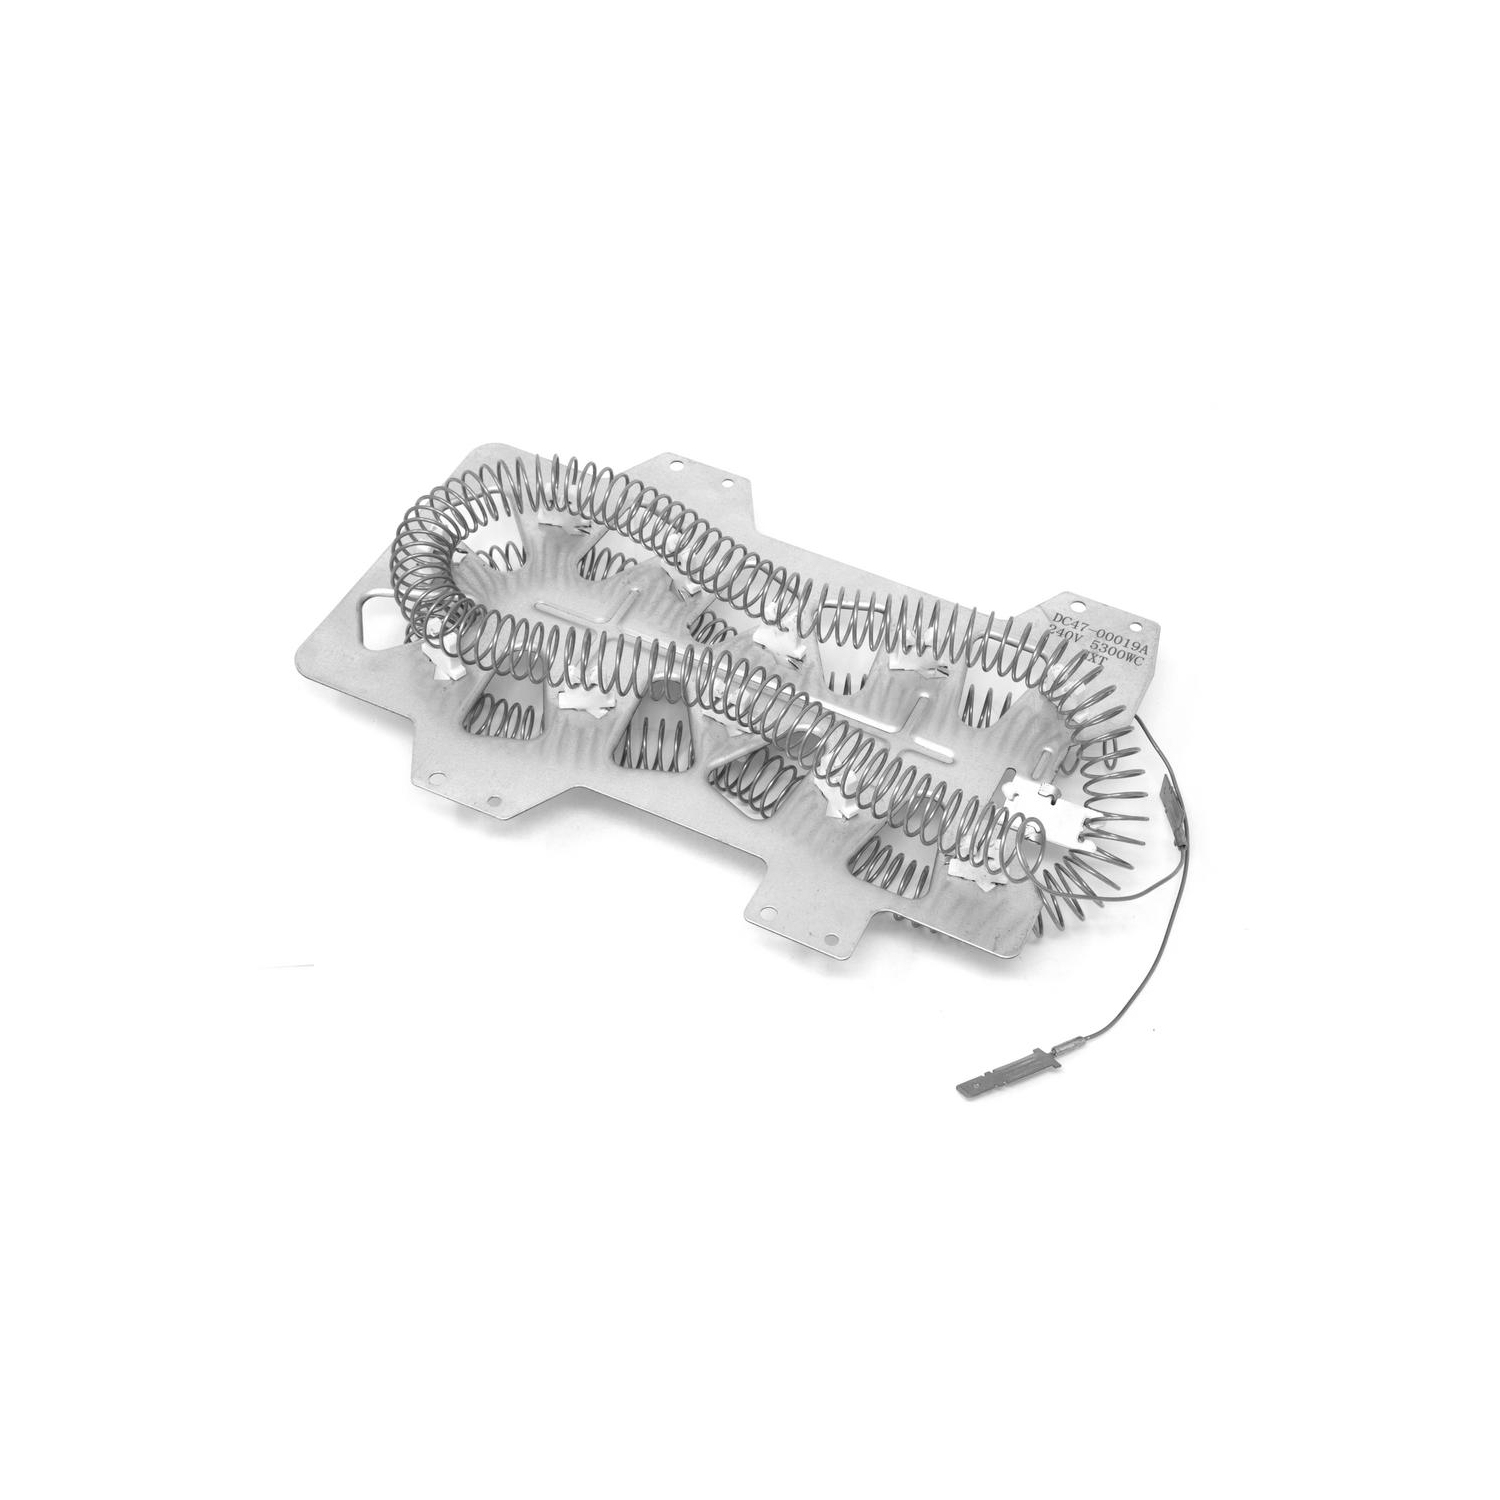 DC47-00019A Dryer Heating Element for Samsung Dryers